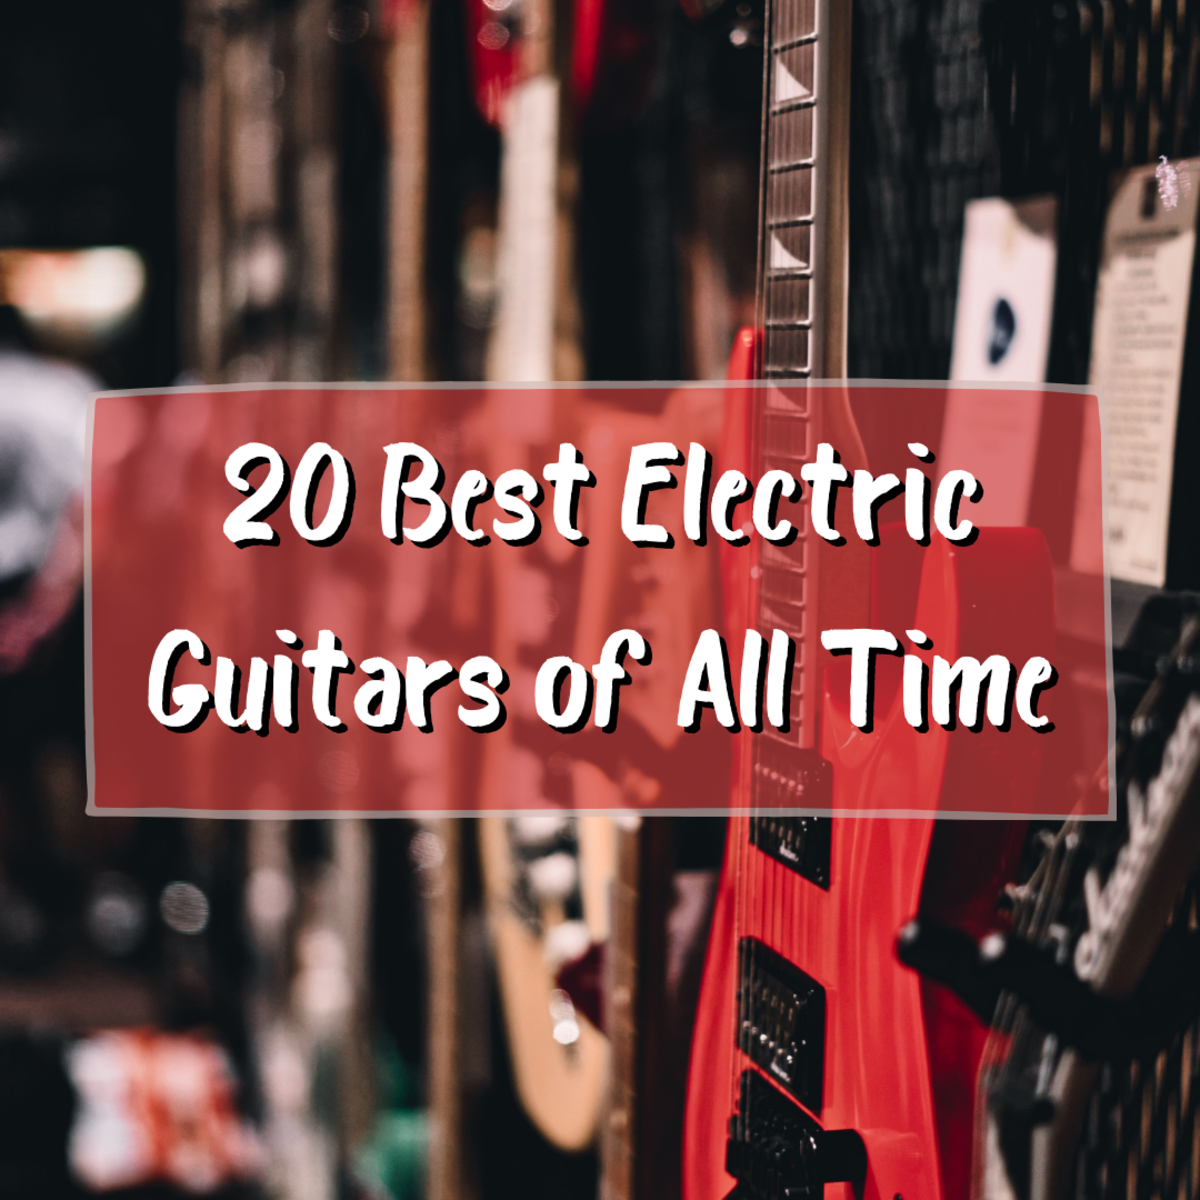 Read on to learn about 20 of the best electric guitars of all  time.